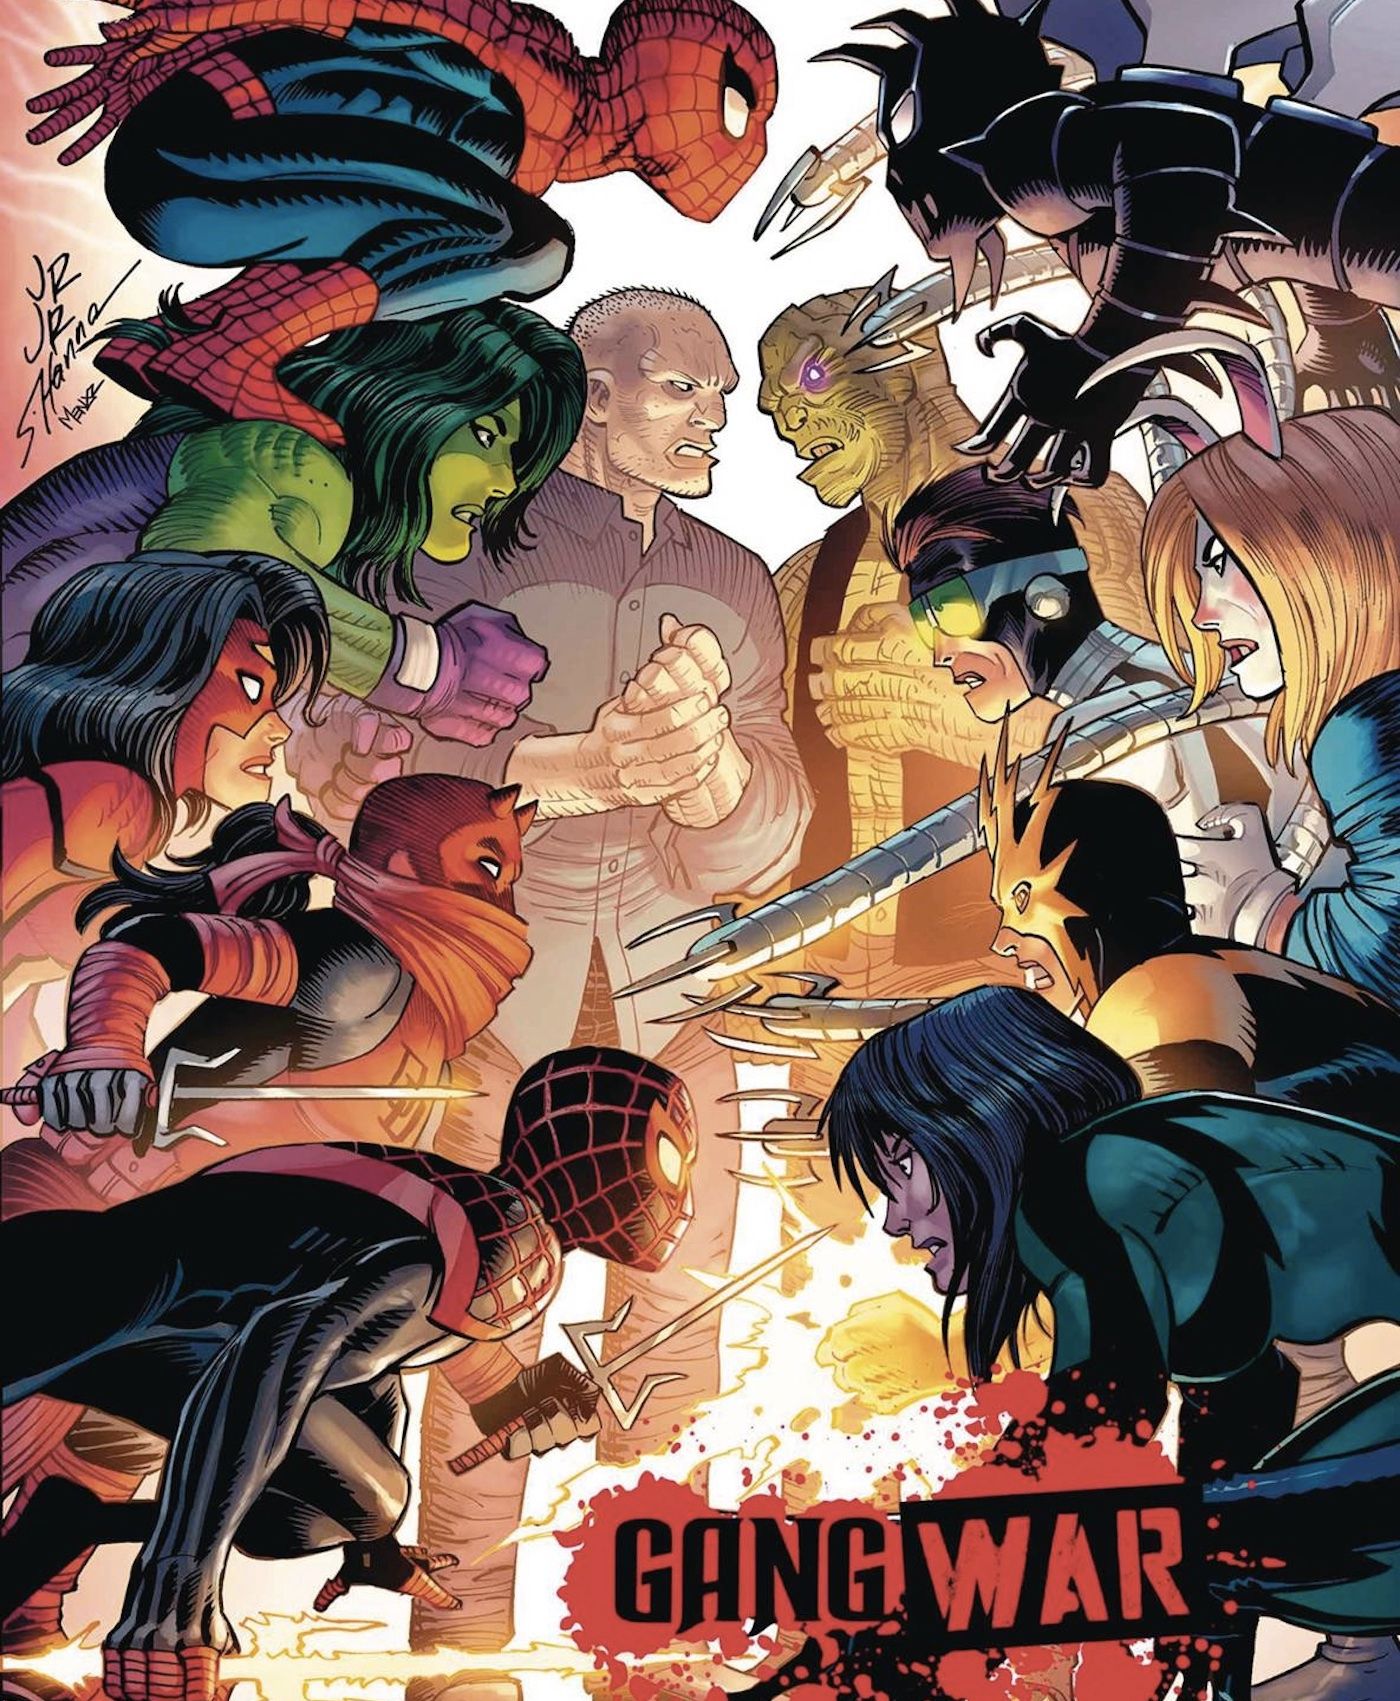 GANG WAR: What’s Happening In Marvel’s Street Level Crossover Event (So Far)